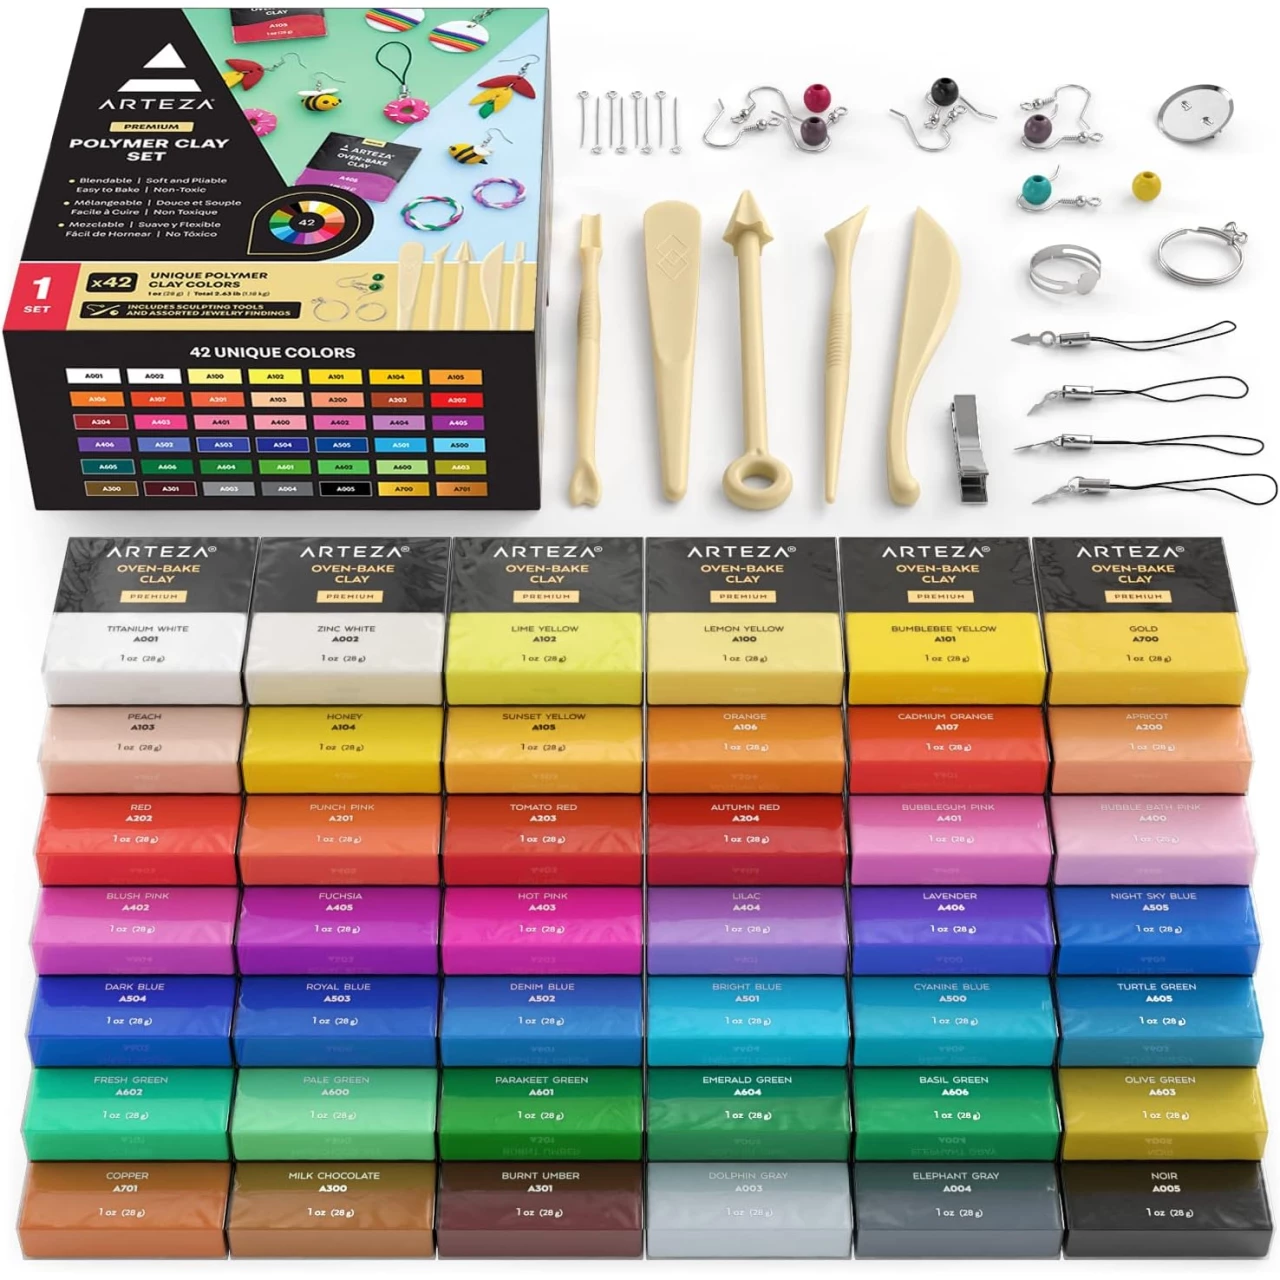 Arteza Polymer Clay Kit, Modeling Clay Oven Bake for Adults and Teens with 5 Sculpting Tools, 42 Colors